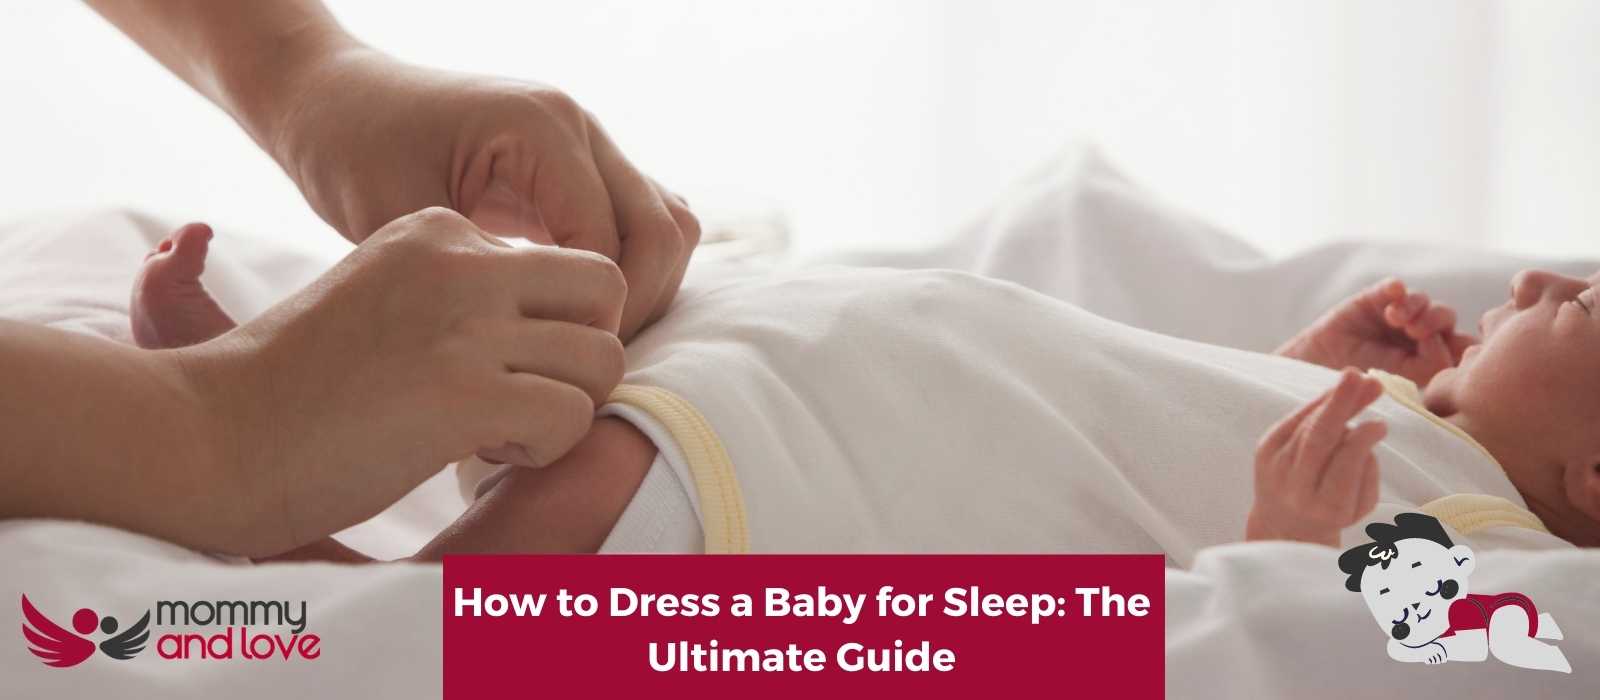 How to Dress a Baby for Sleep The Ultimate Guide